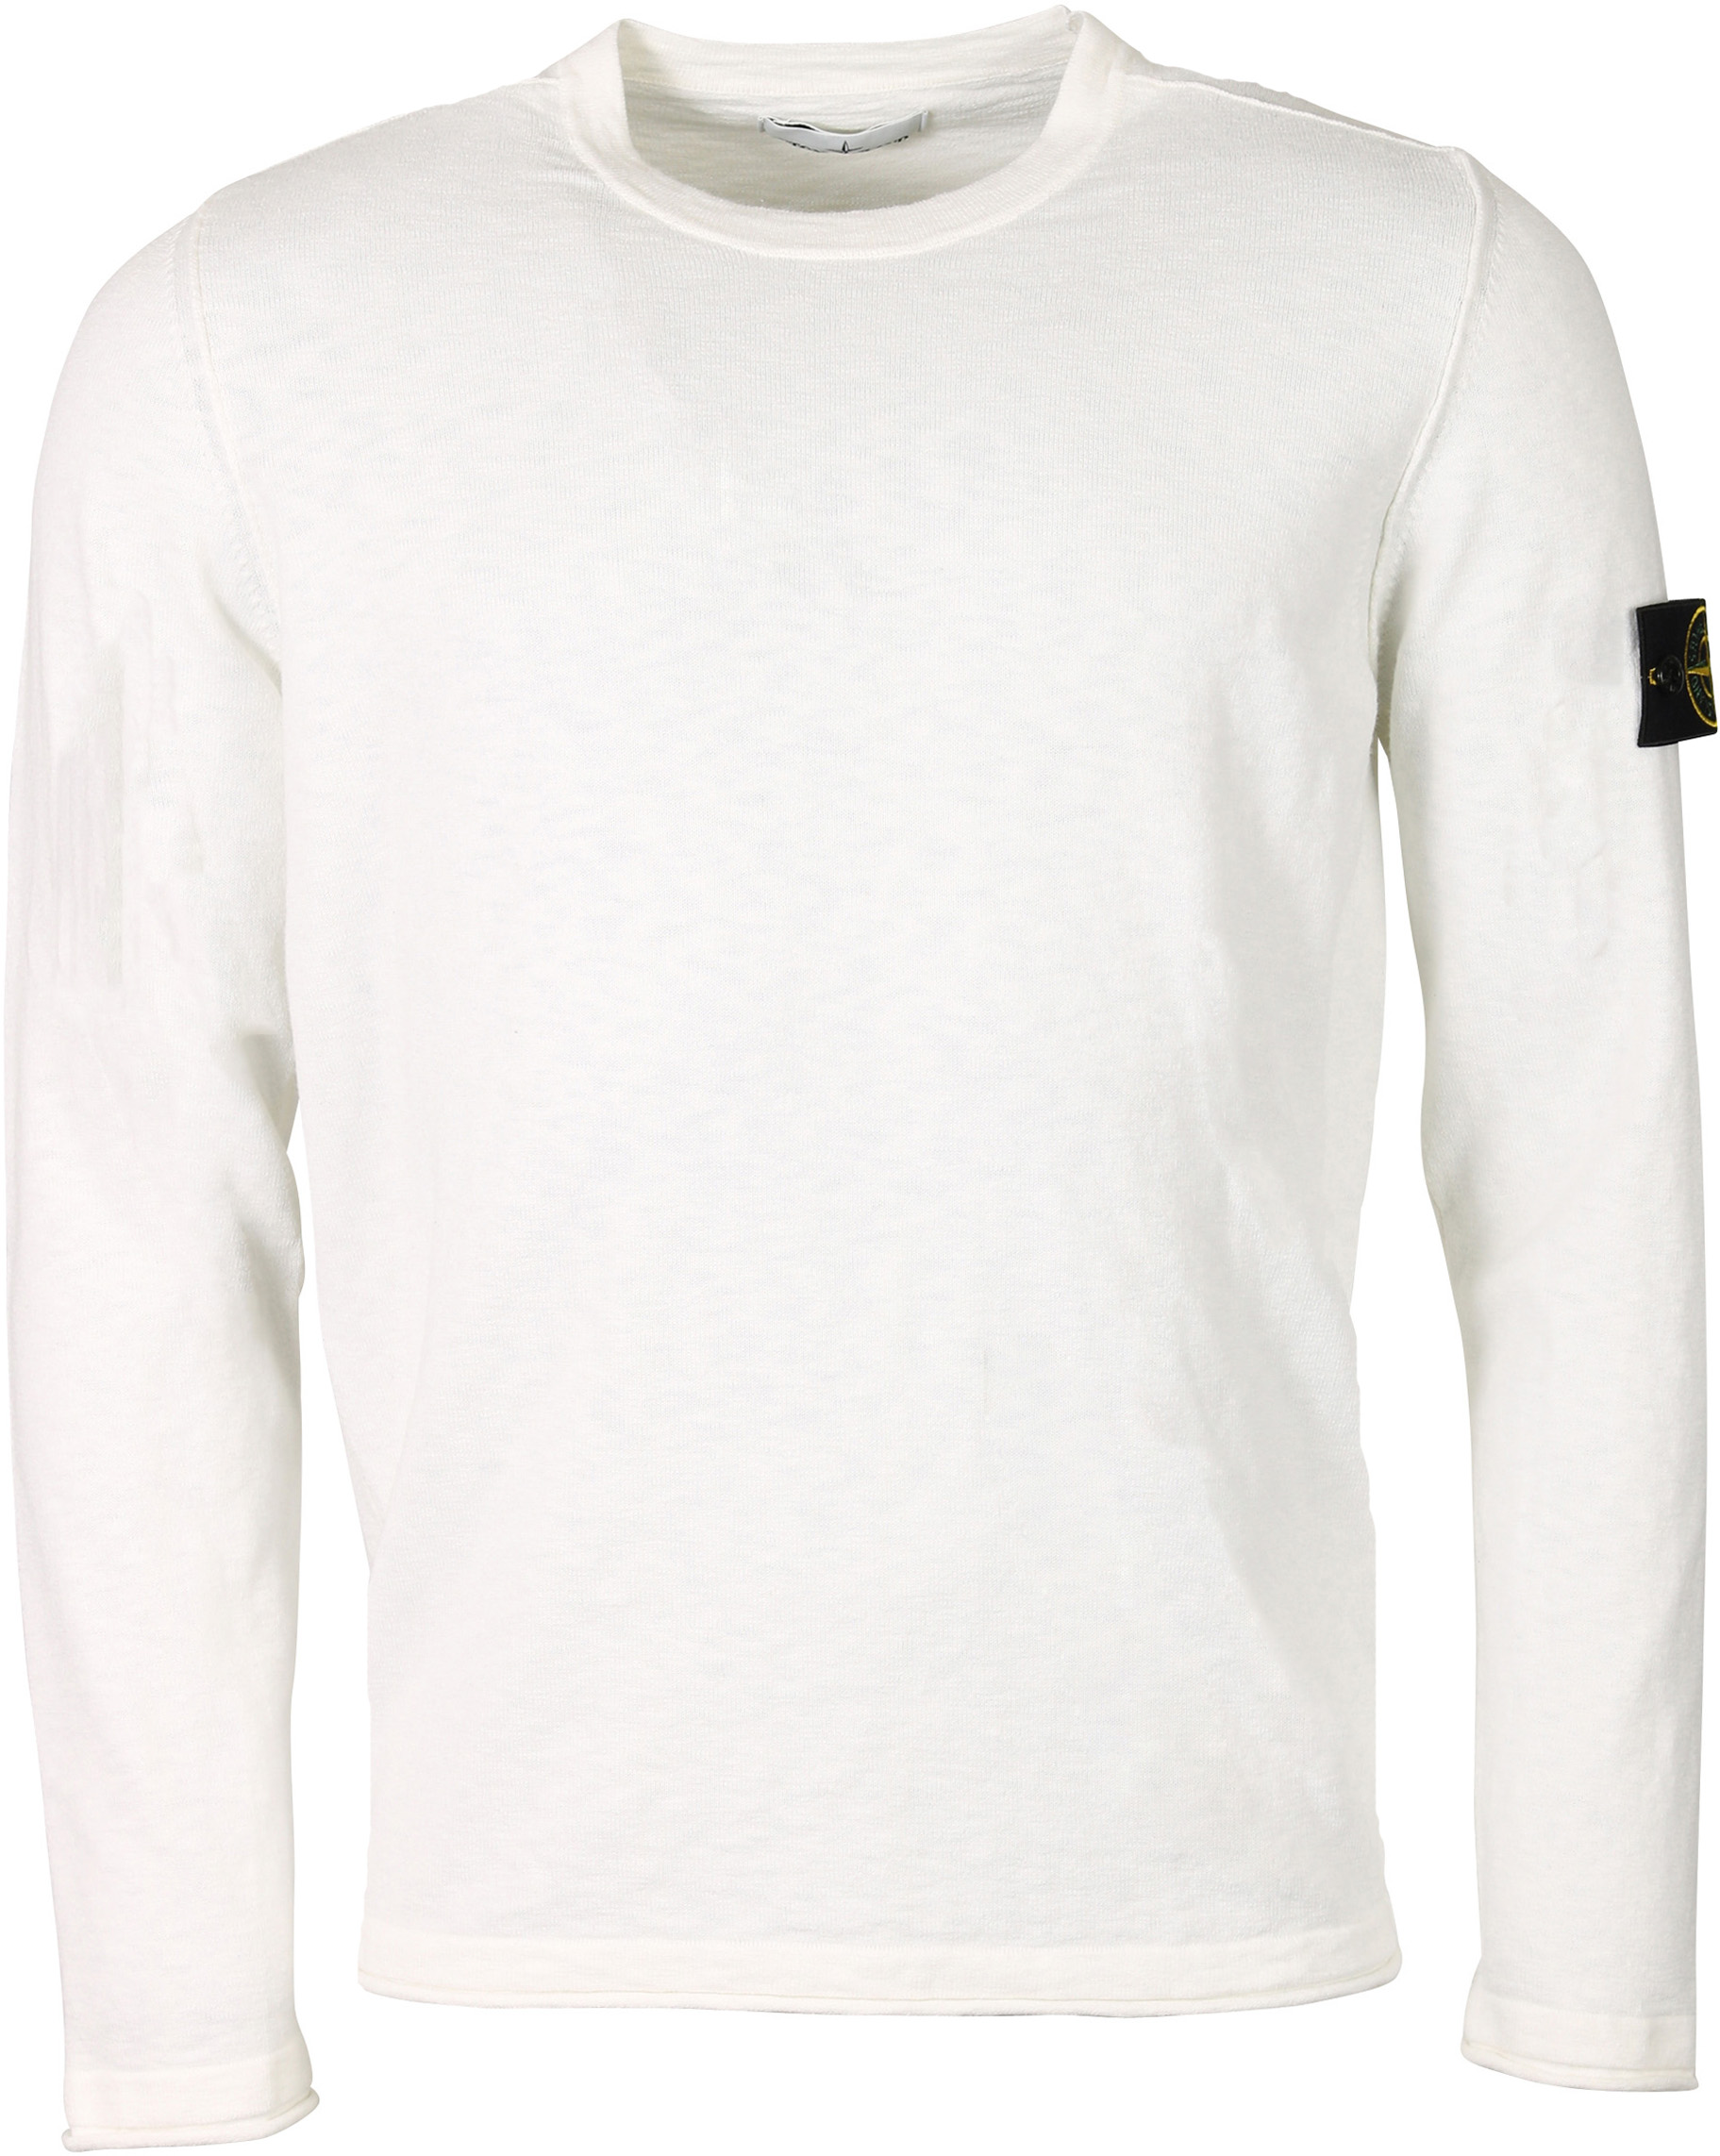 Stone Island Knit Sweater in White